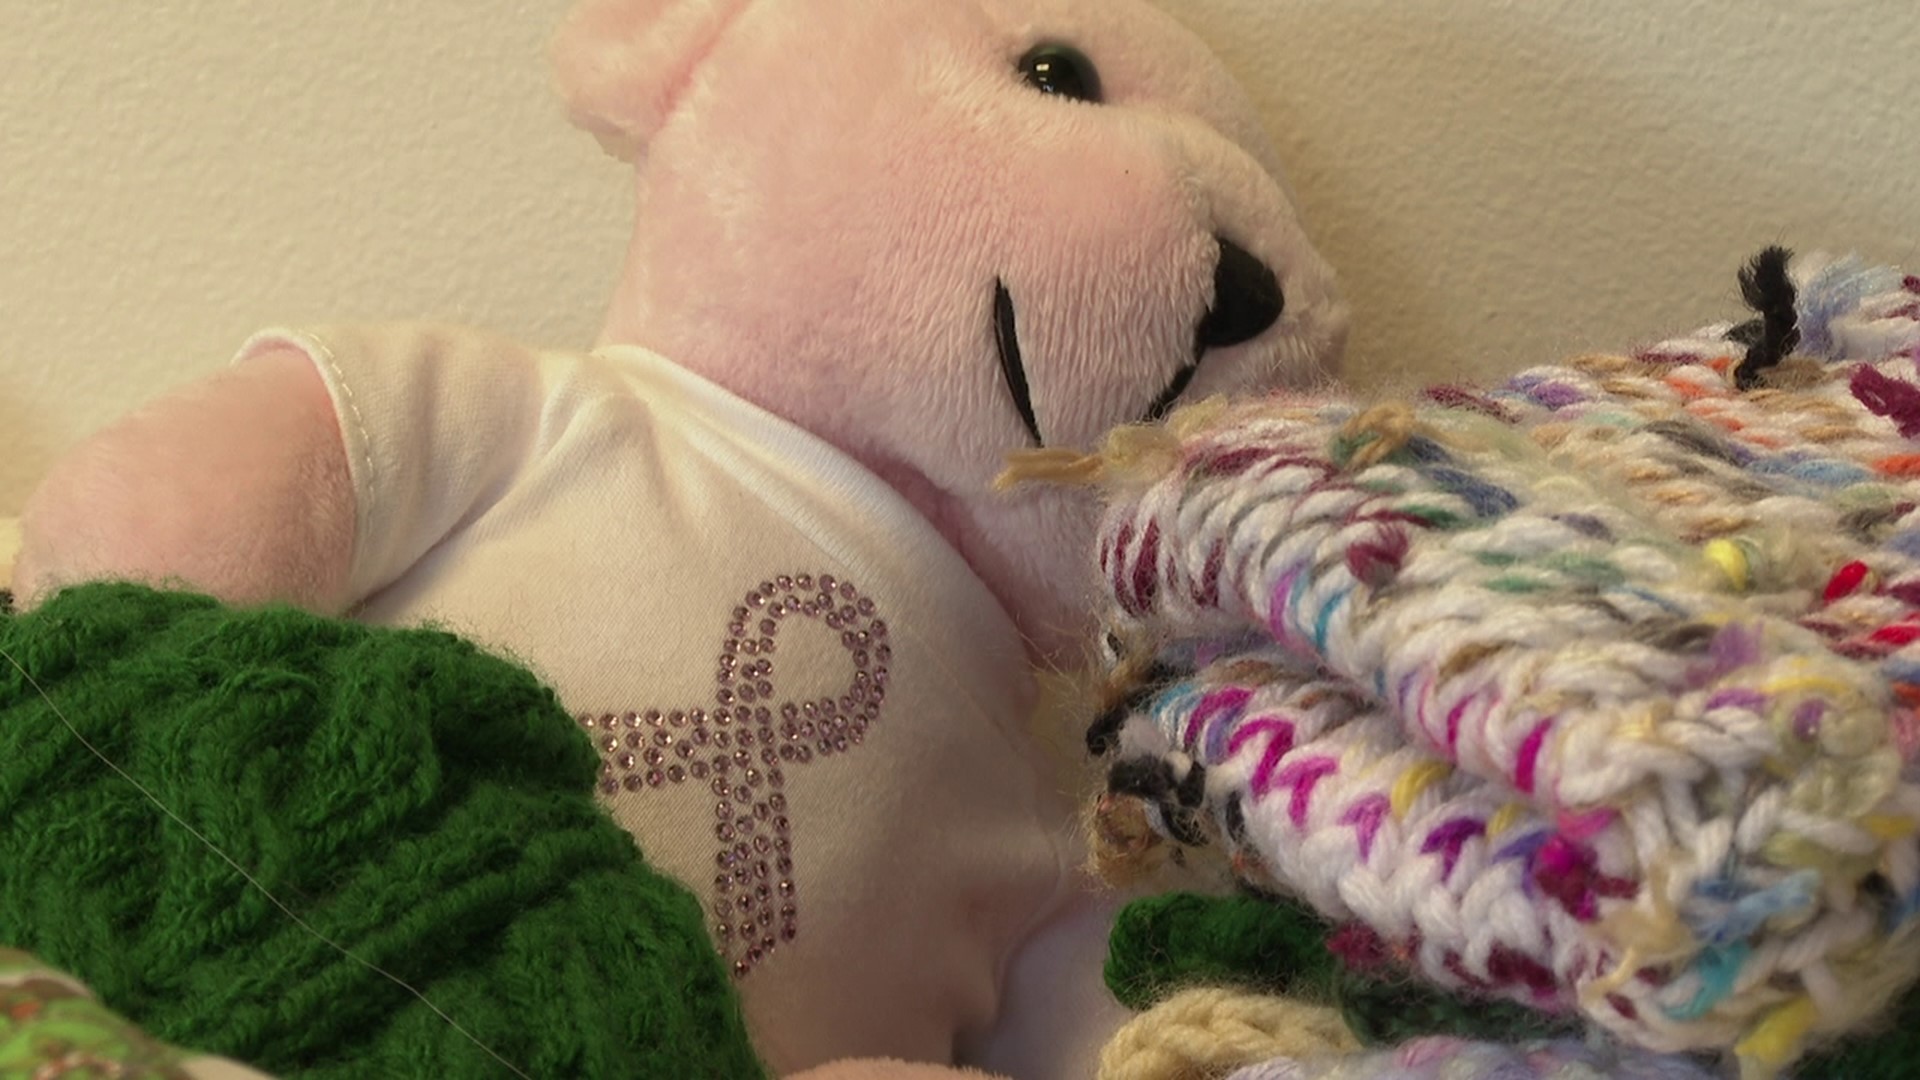 Cancer Wellness Center Of Nepa Bringing Comfort To Those Battling Cancer This Holiday